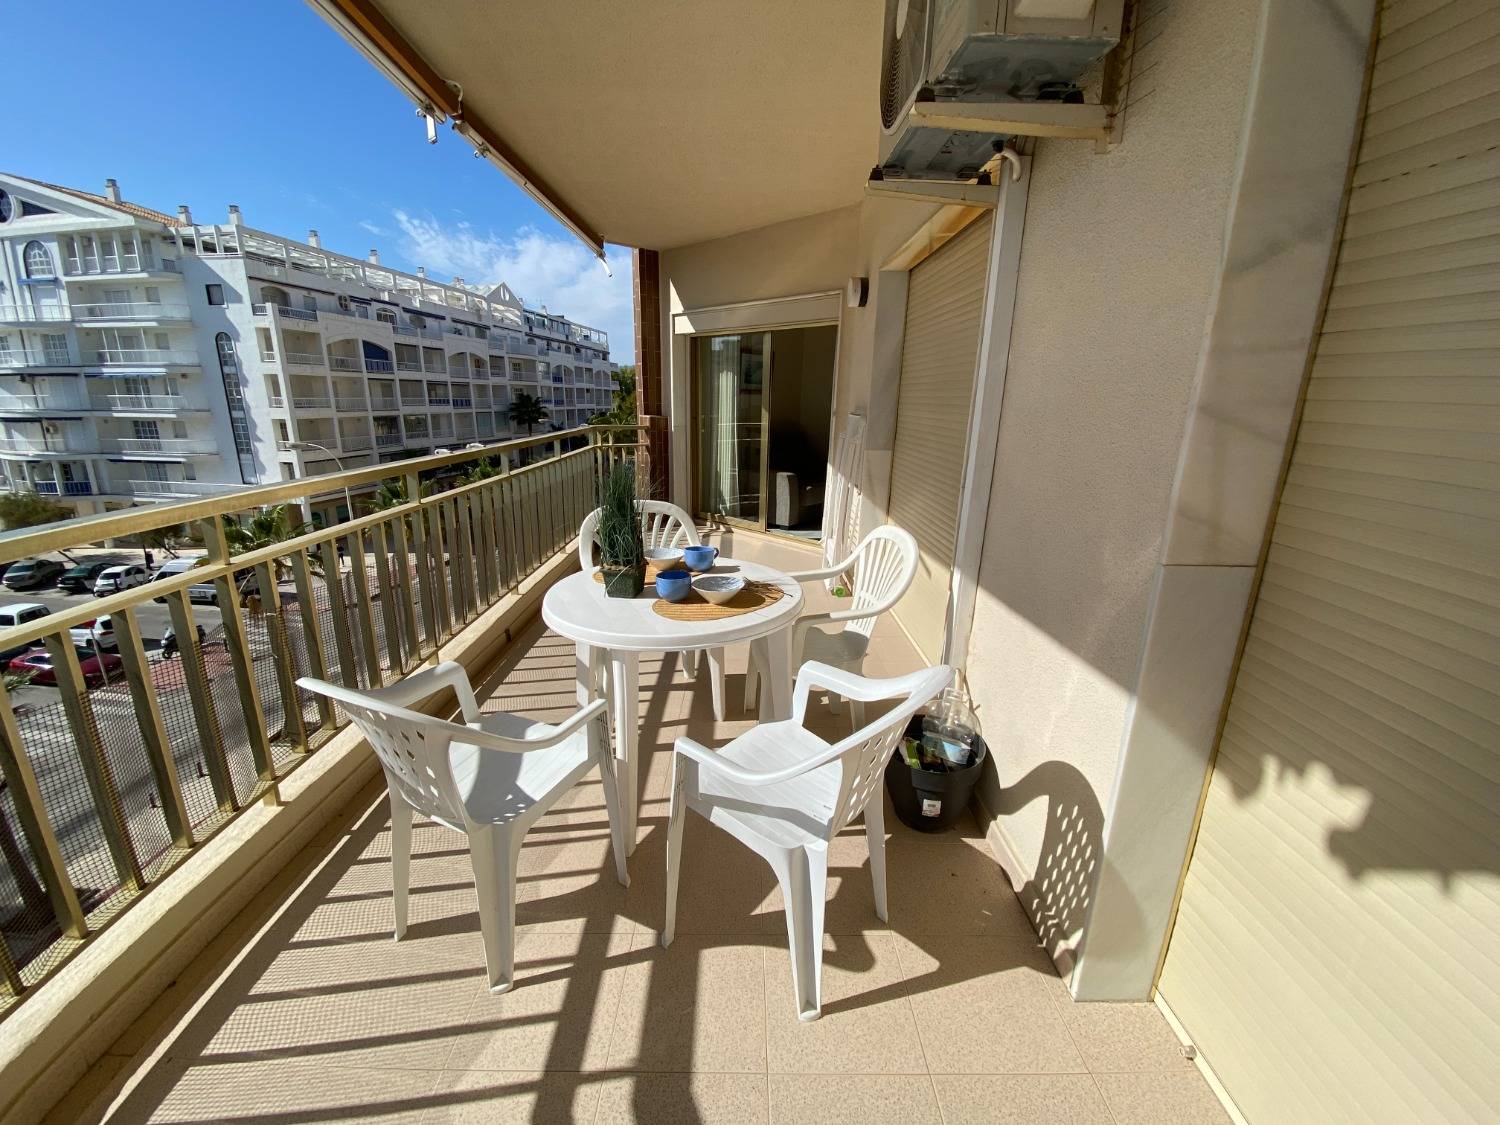 A few meters from the beach . On the beachfront in Fuengirola